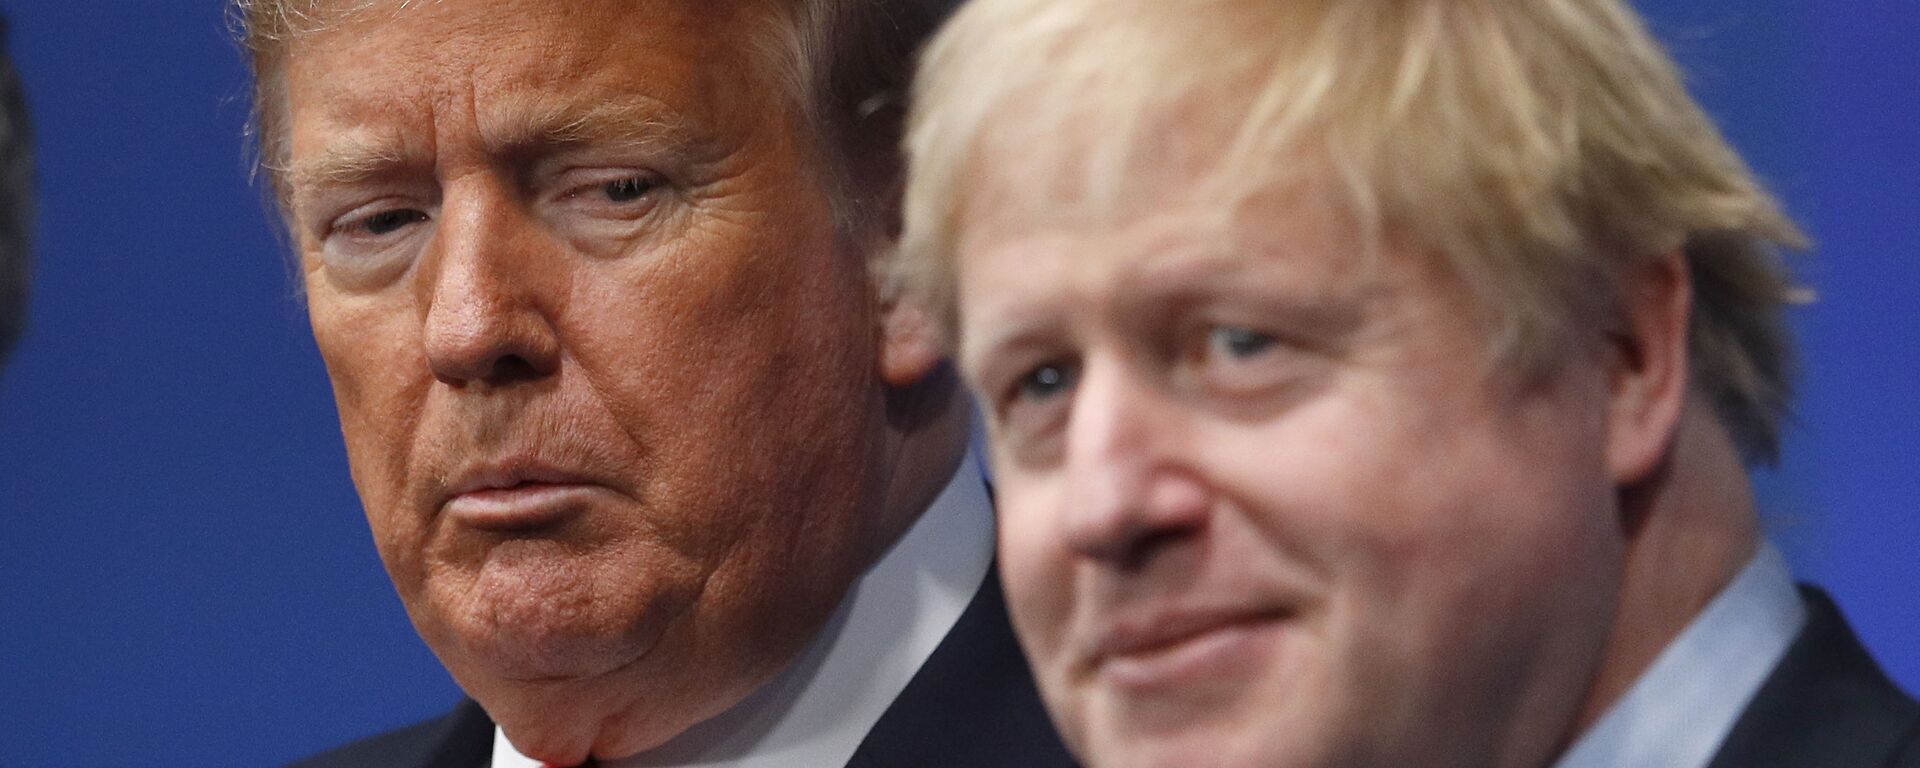 British Prime Minister Boris Johnson, right, and U.S. President Donald Trump pose during a group photo during a NATO leaders meeting at The Grove hotel and resort in Watford, Hertfordshire, England, Wednesday, Dec. 4, 2019 - Sputnik International, 1920, 17.12.2020